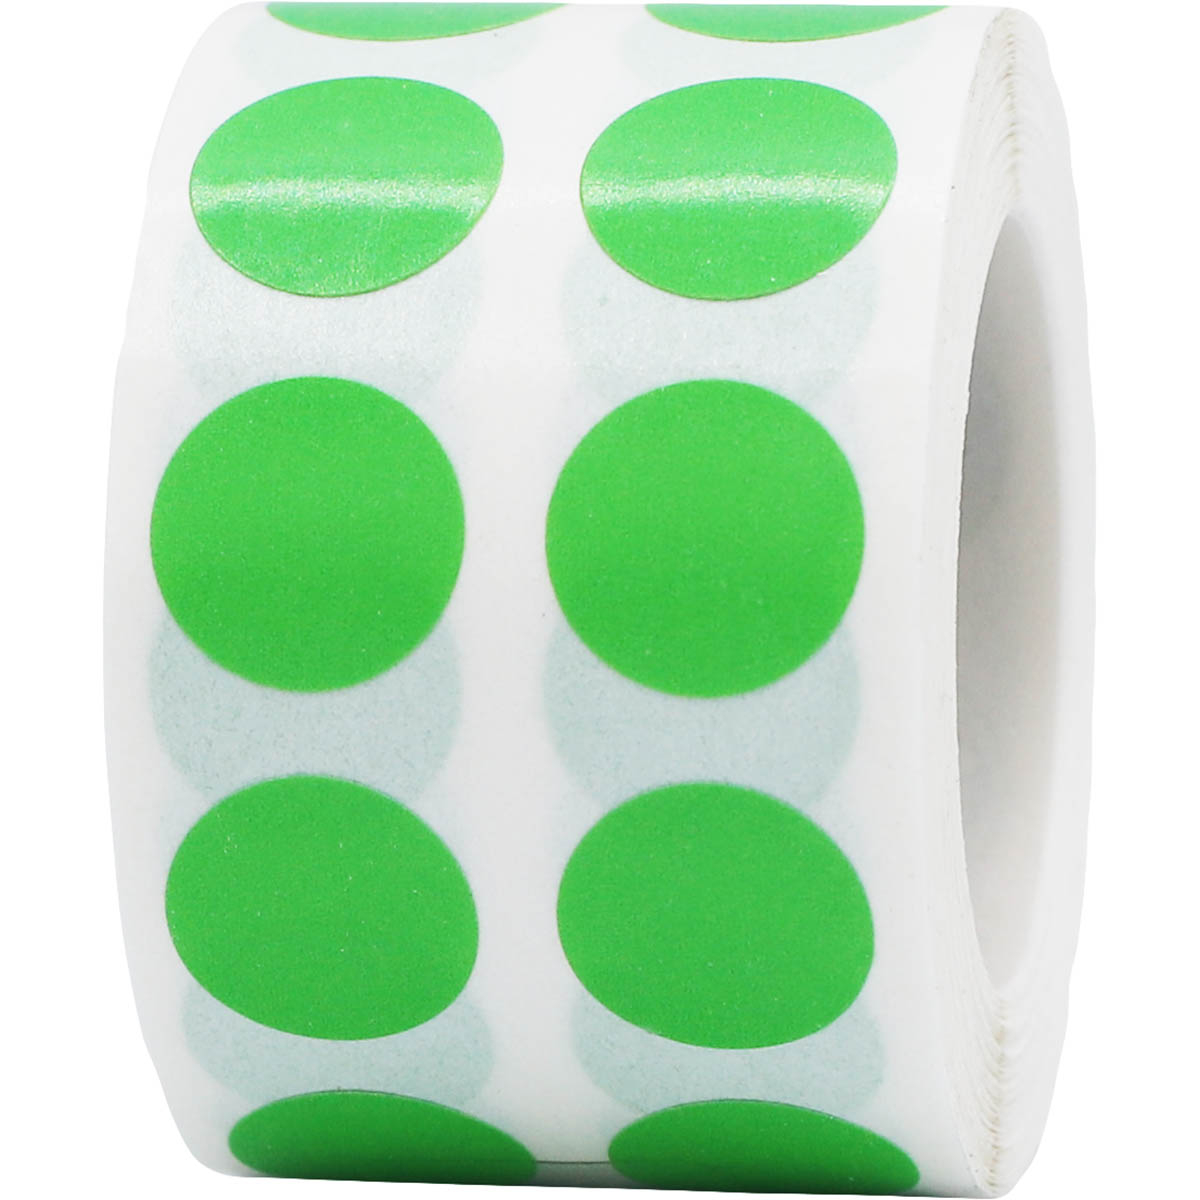 Small Metalized Green Dot Stickers 1/2 Round